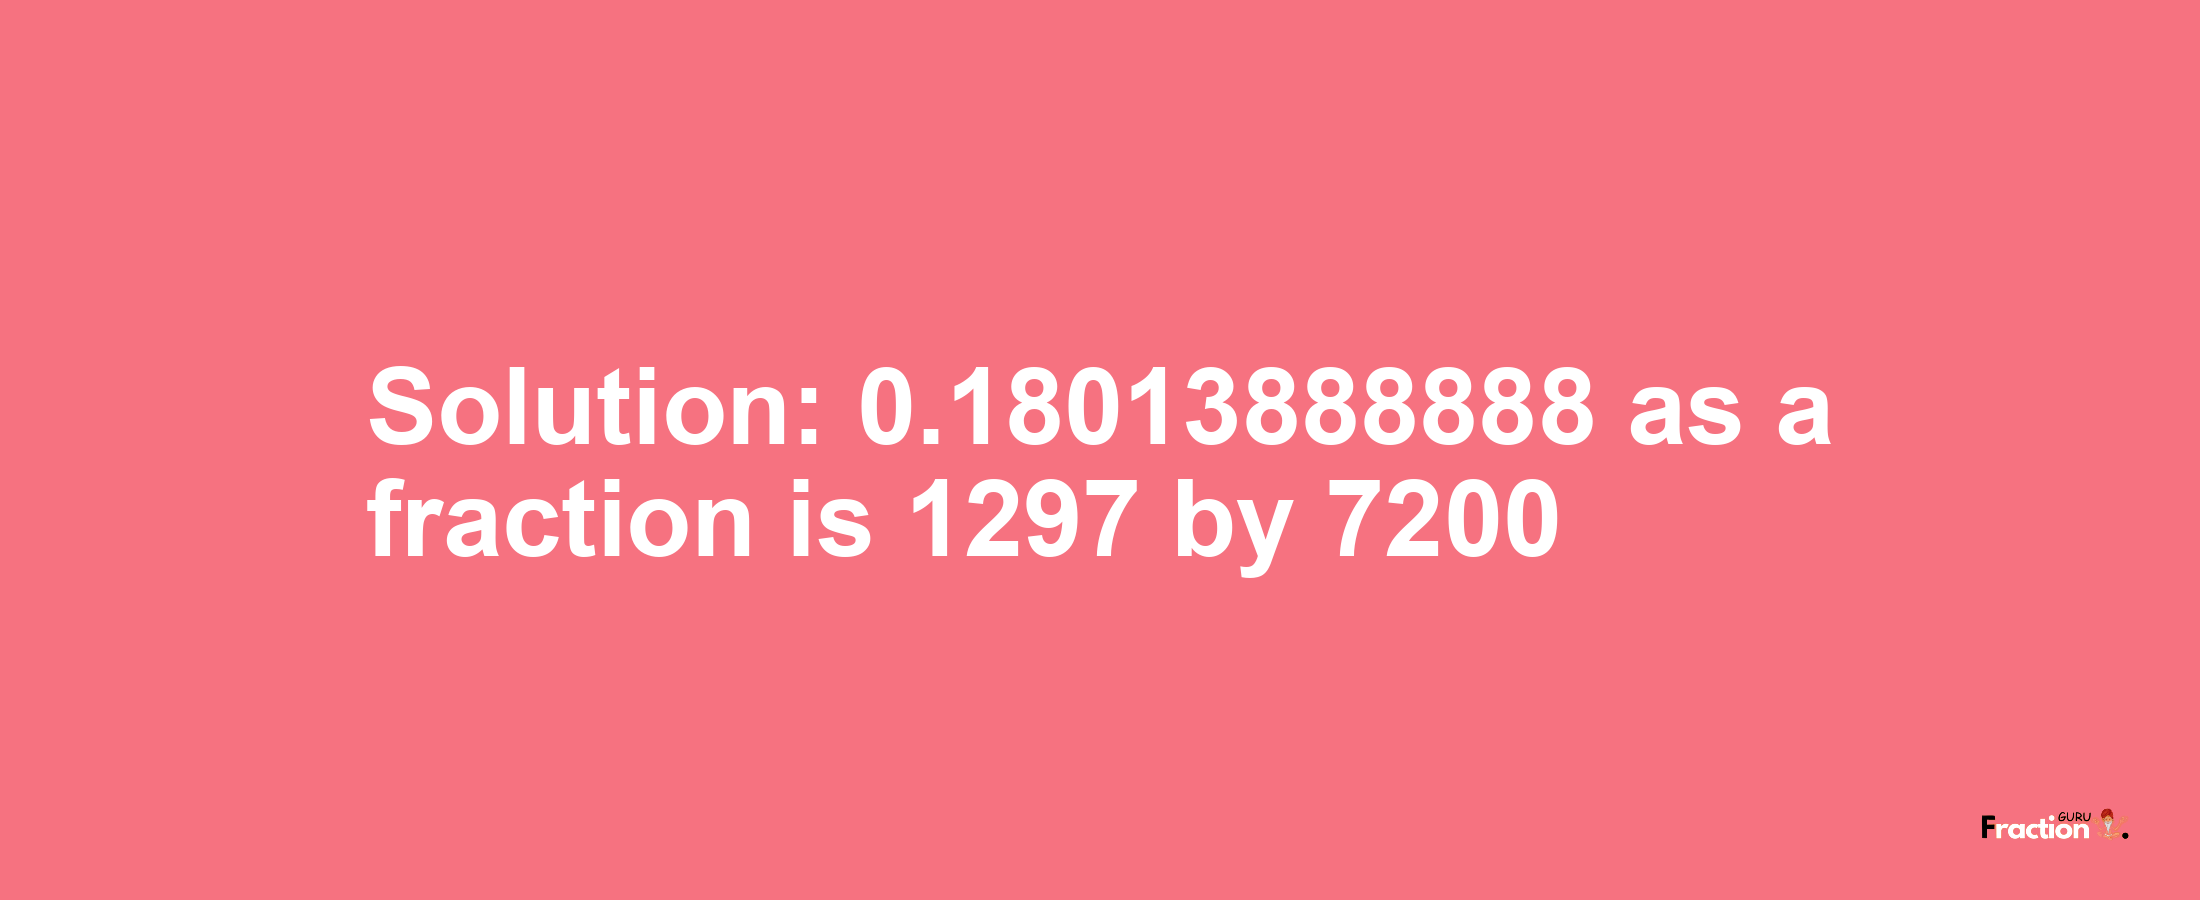 Solution:0.18013888888 as a fraction is 1297/7200